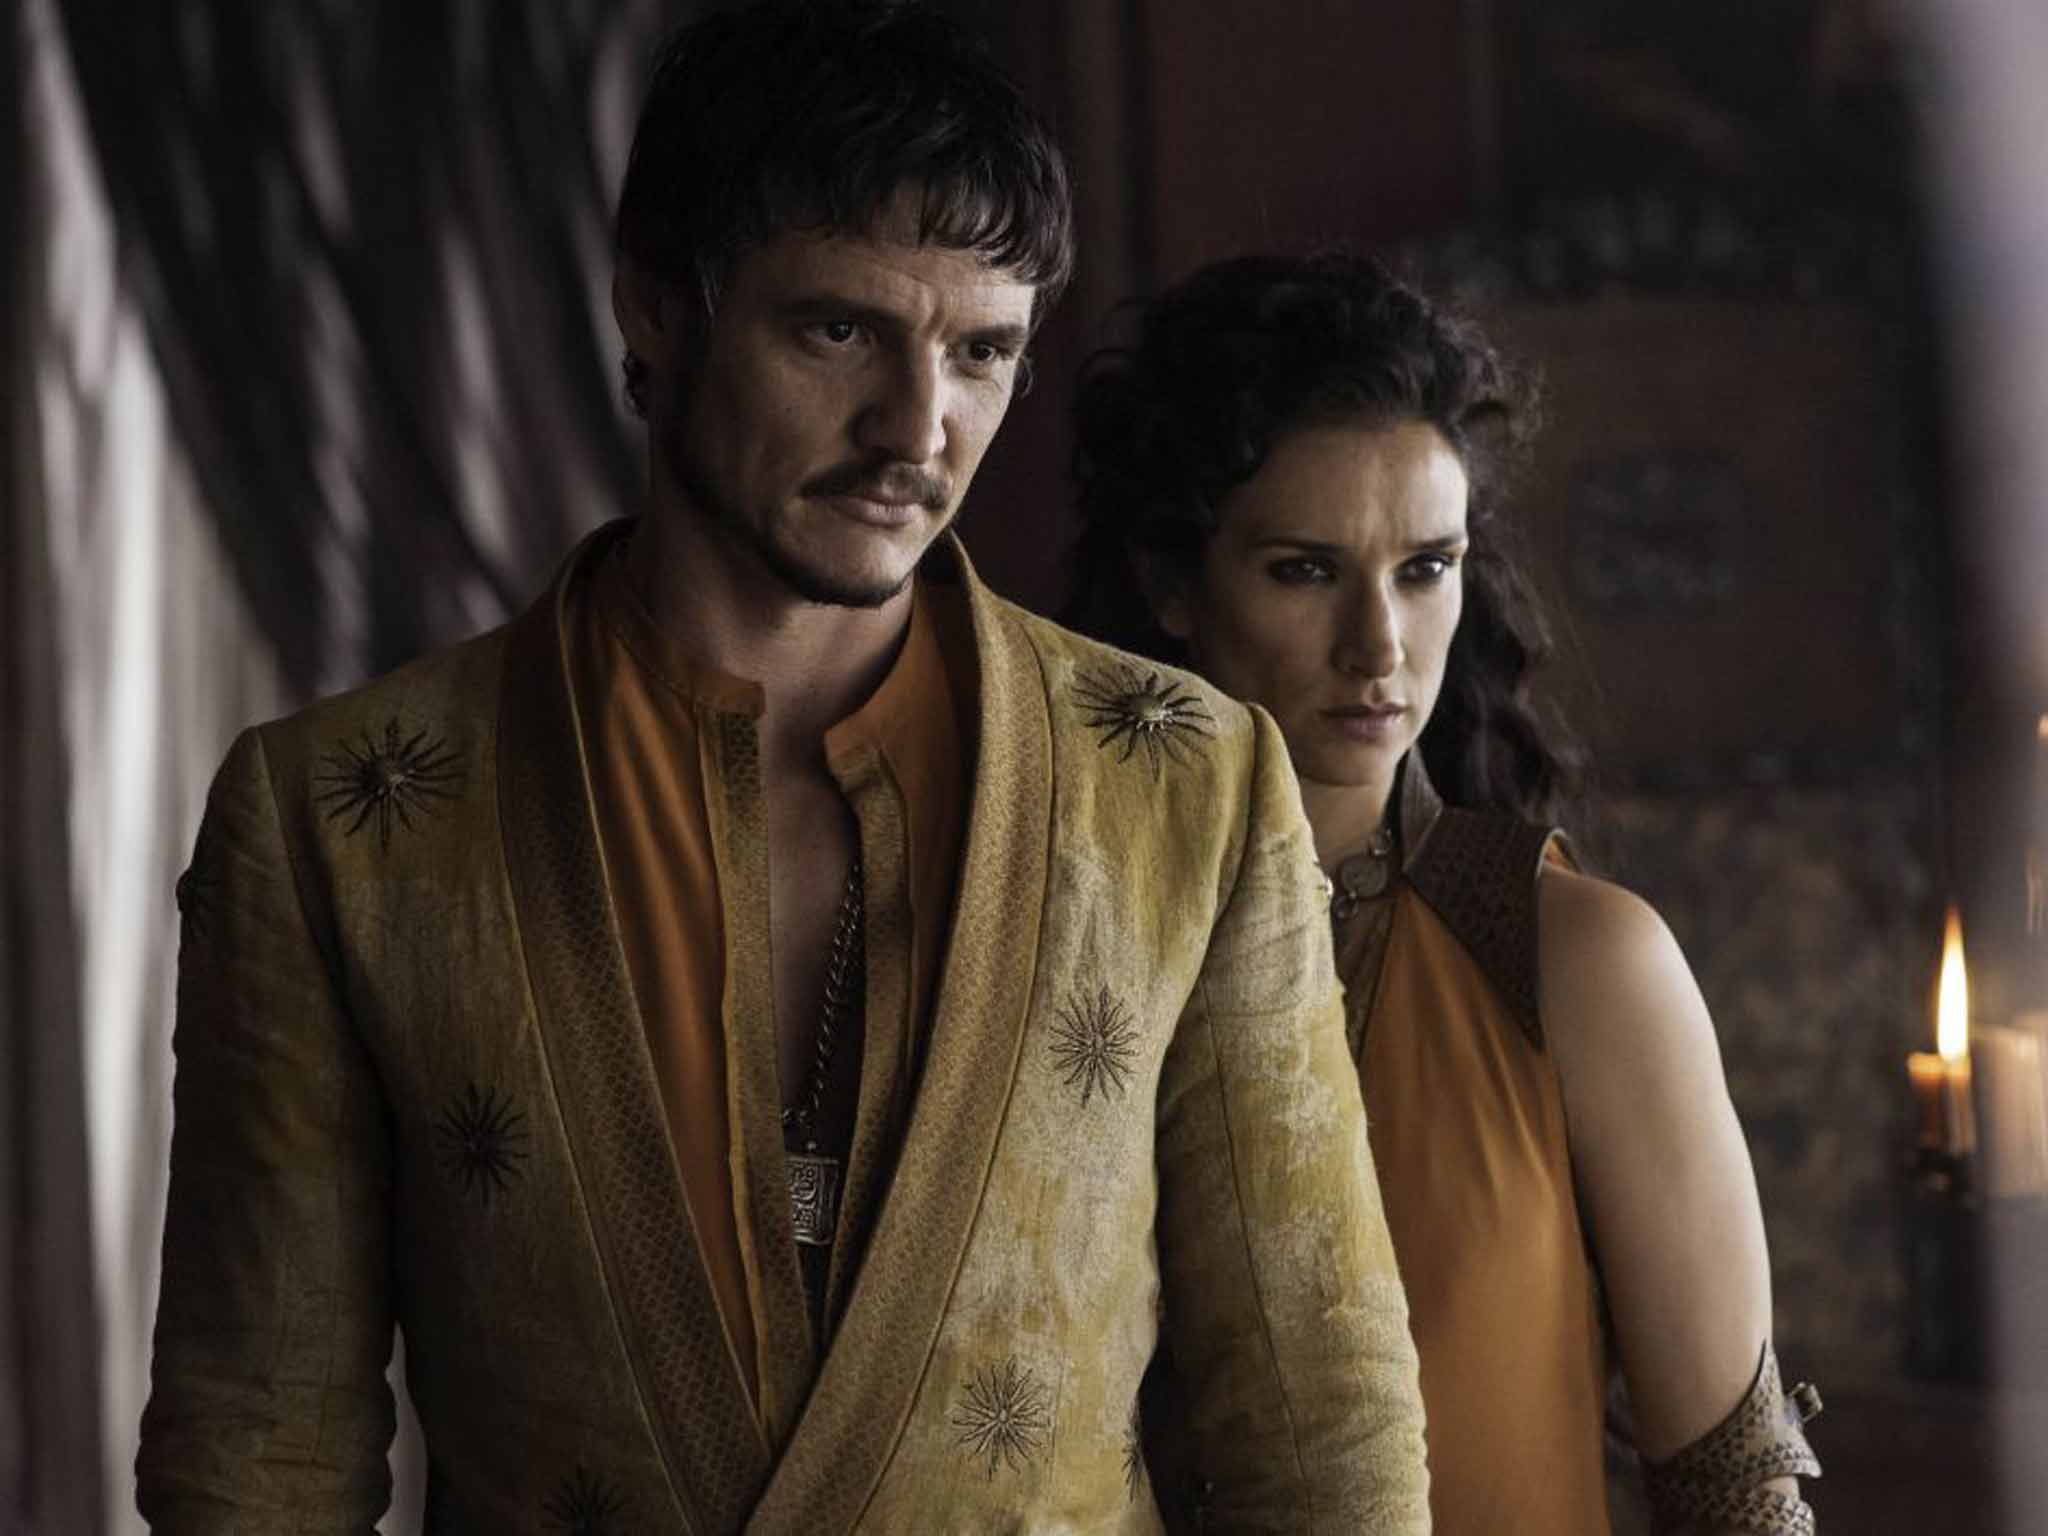 Indira Varma with Pedro Pascal in 'Game of Thrones'